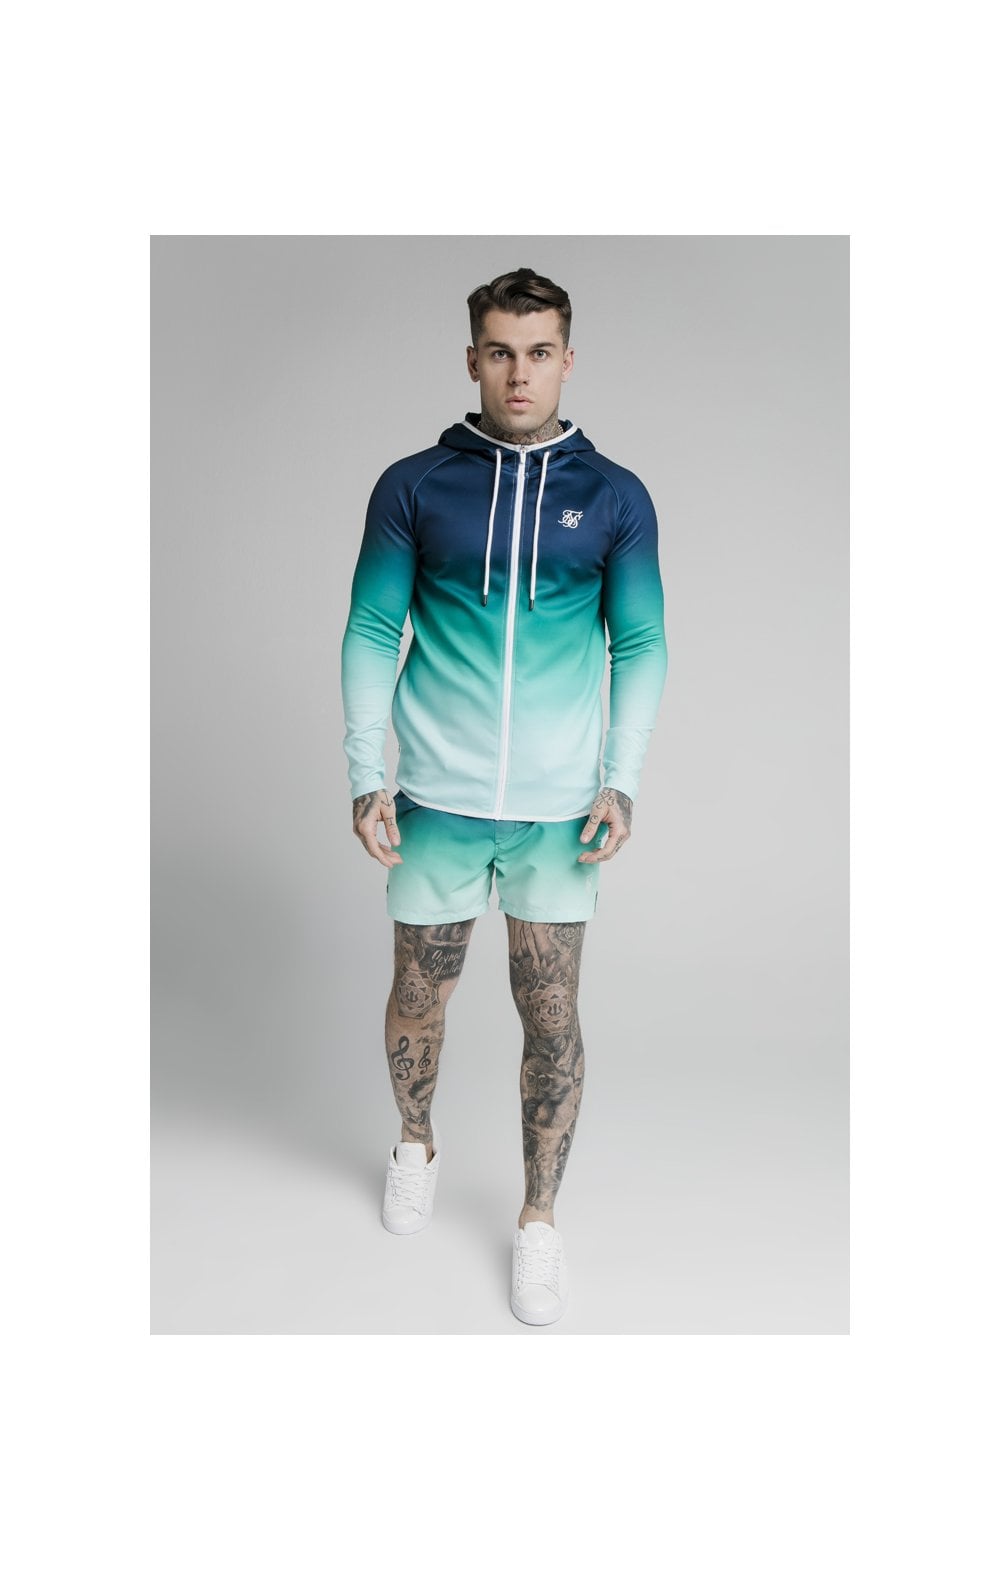 Load image into Gallery viewer, SikSilk Inset Fade Zip Through Hoodie - Navy Pacific Fade (3)